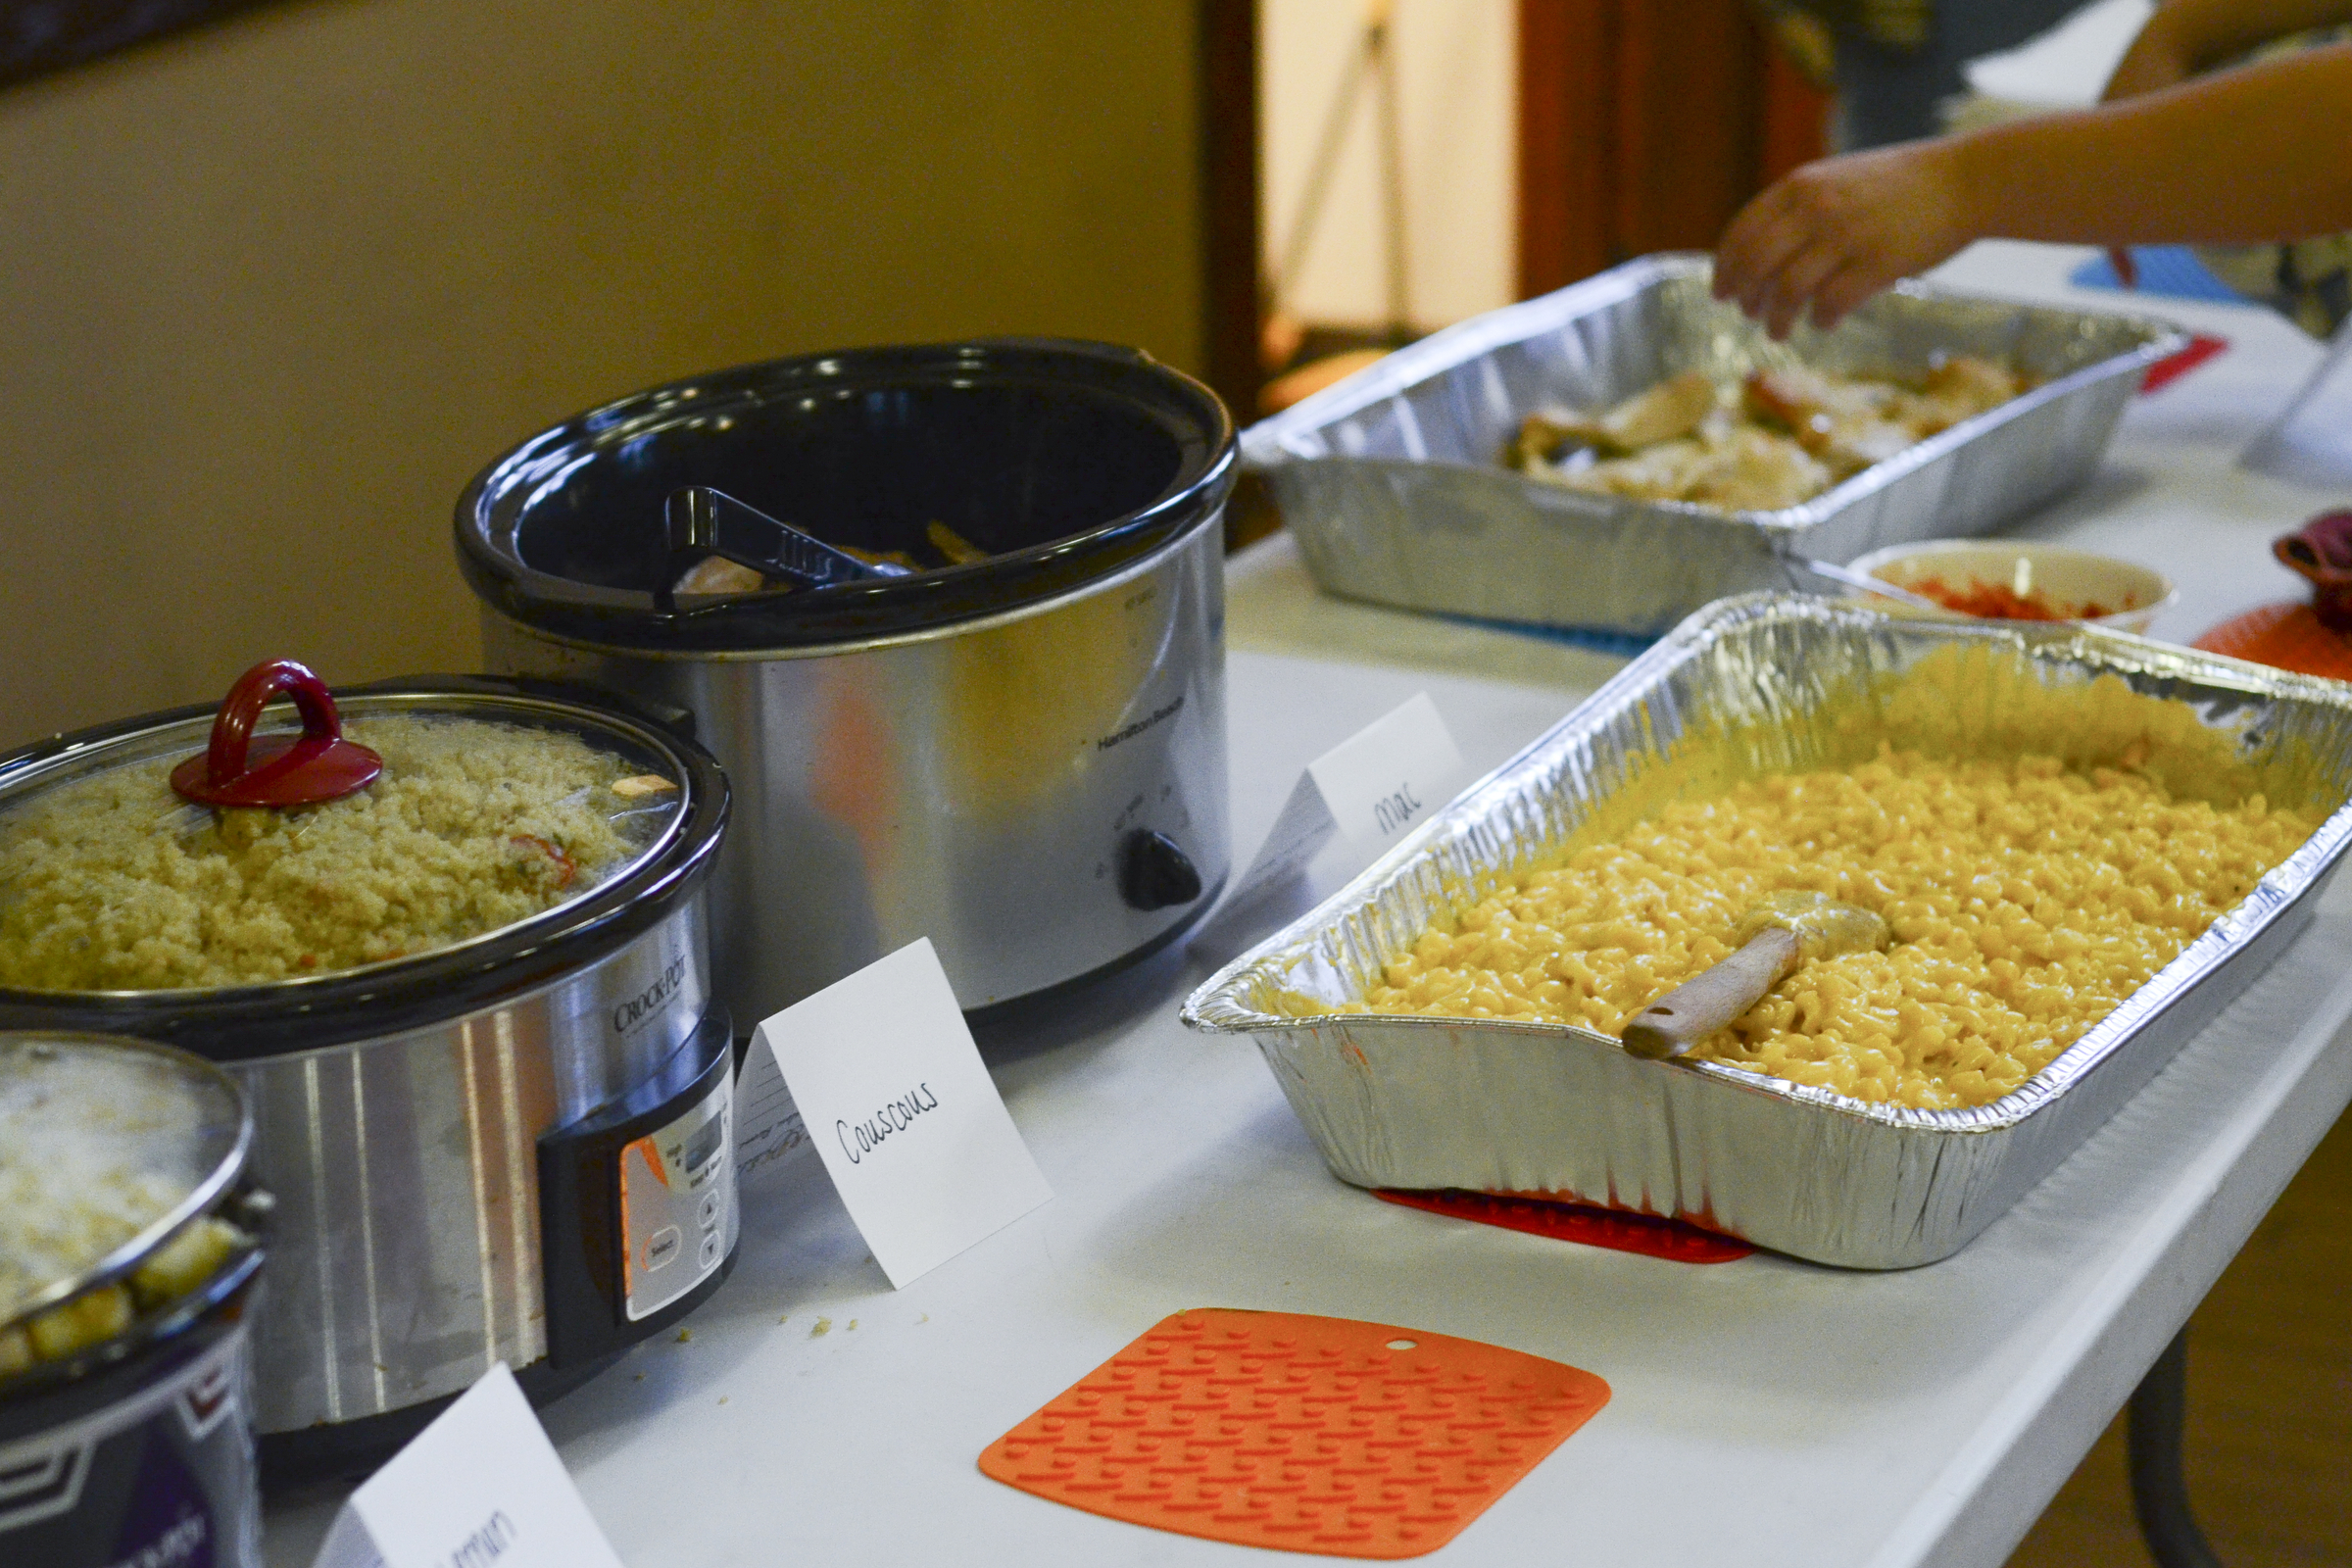 Dinner is served at the Food Recovery Network’s community meal at The Crossing Campus Ministry